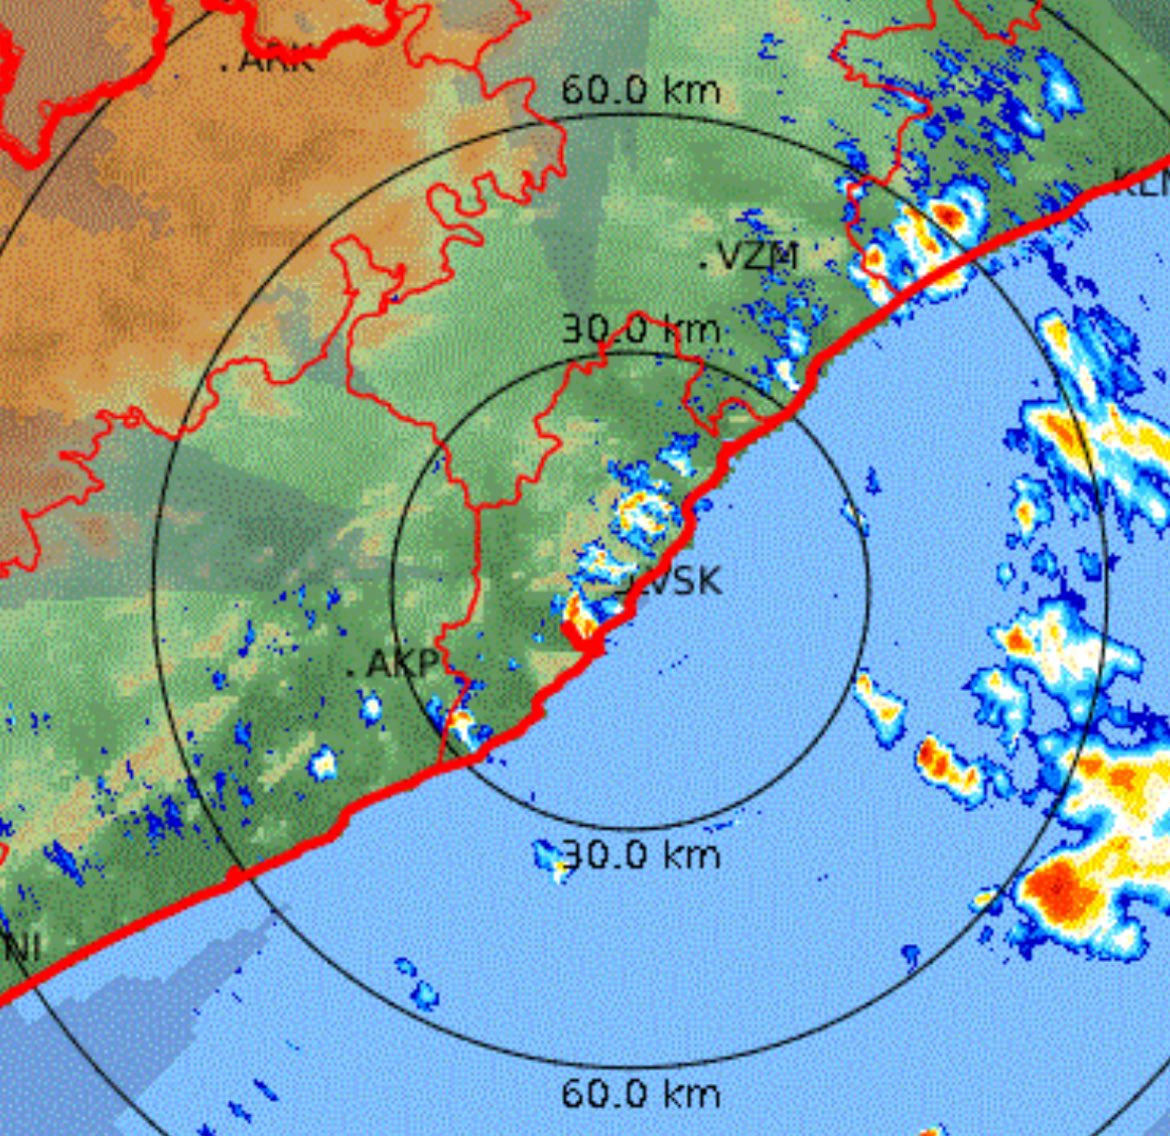 Downpours for few minutes in parts of vizag and Vizianagaram. Areas close to sea ⛈️